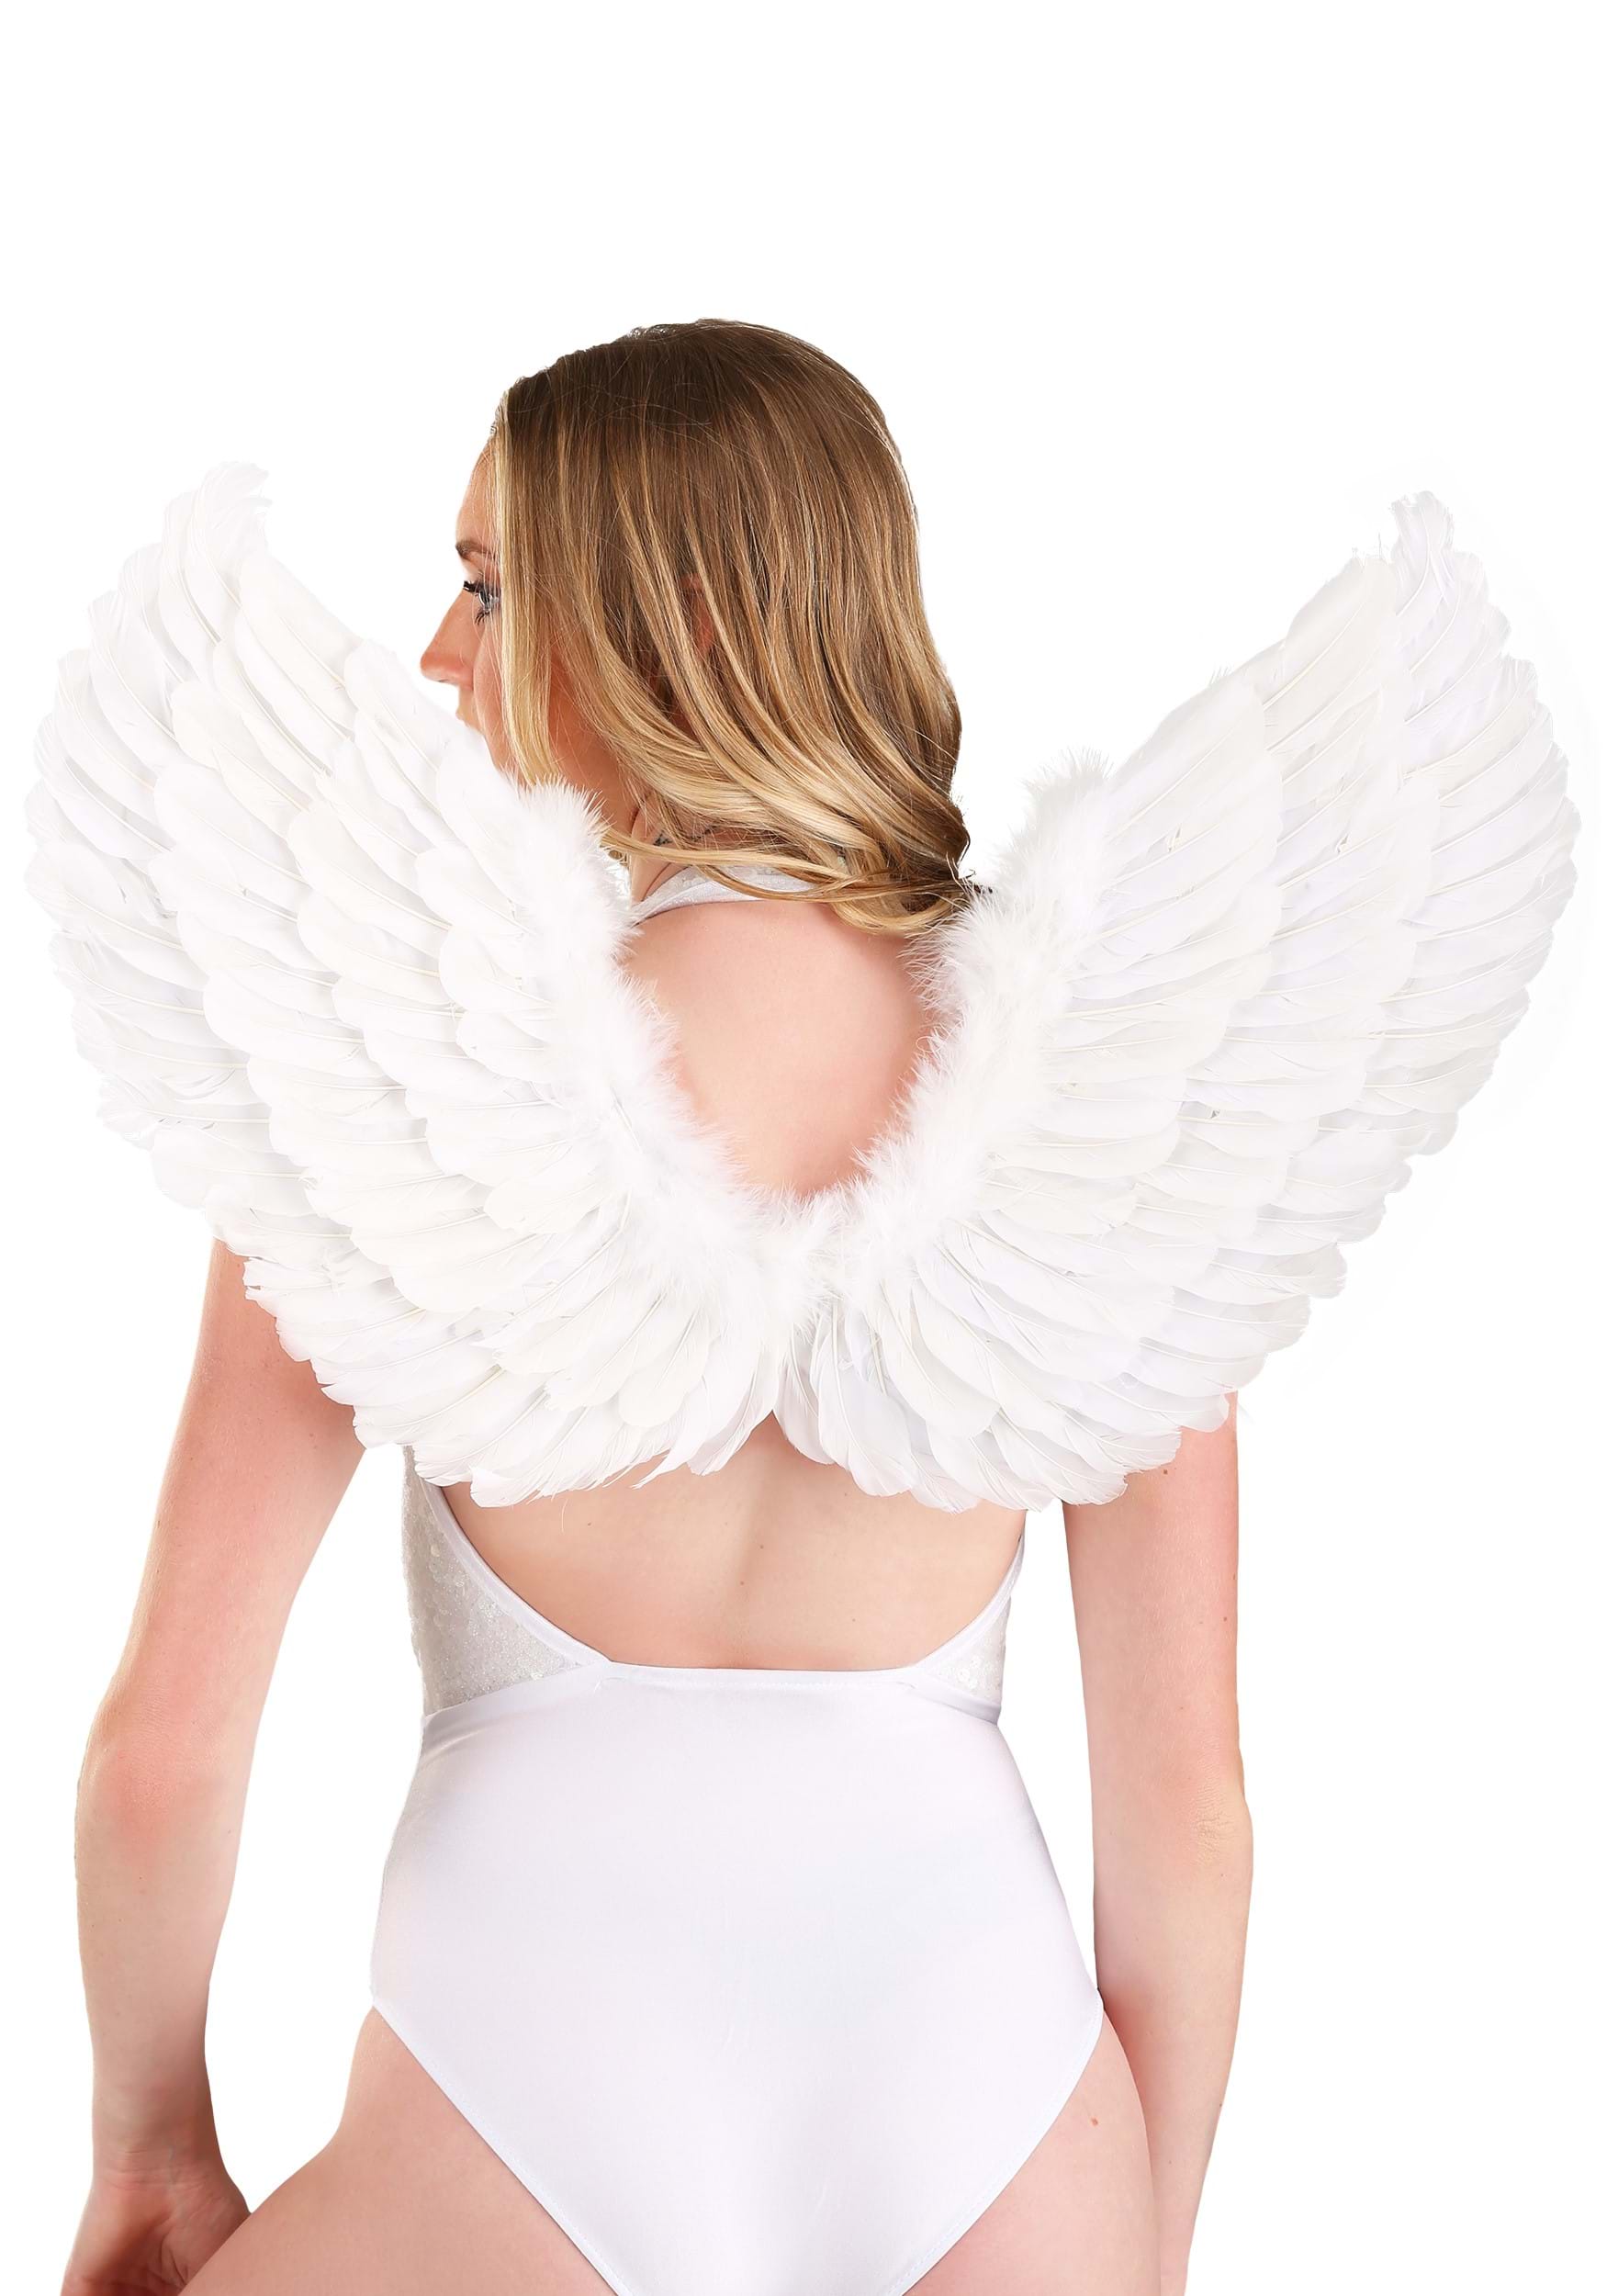 https://images.halloweencostumes.ca/products/70127/1-1/divine-white-angel-wings.jpg